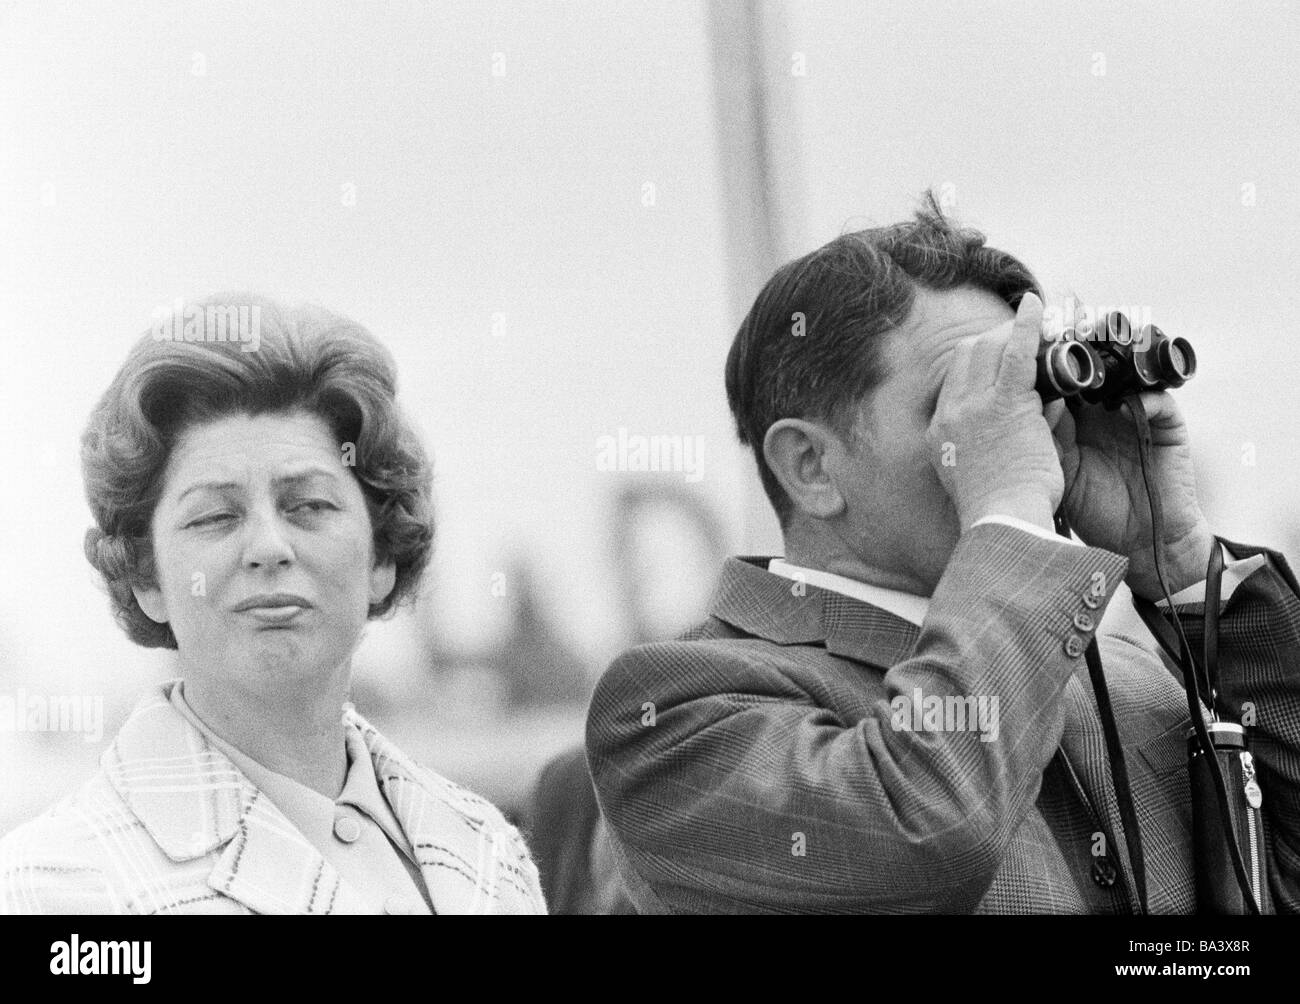 Seventies, black and white photo, people, couple, freetime, contrasts, interest, boredom, man looks through a binoculars, woman is bored, aged 40 to 50 years Stock Photo